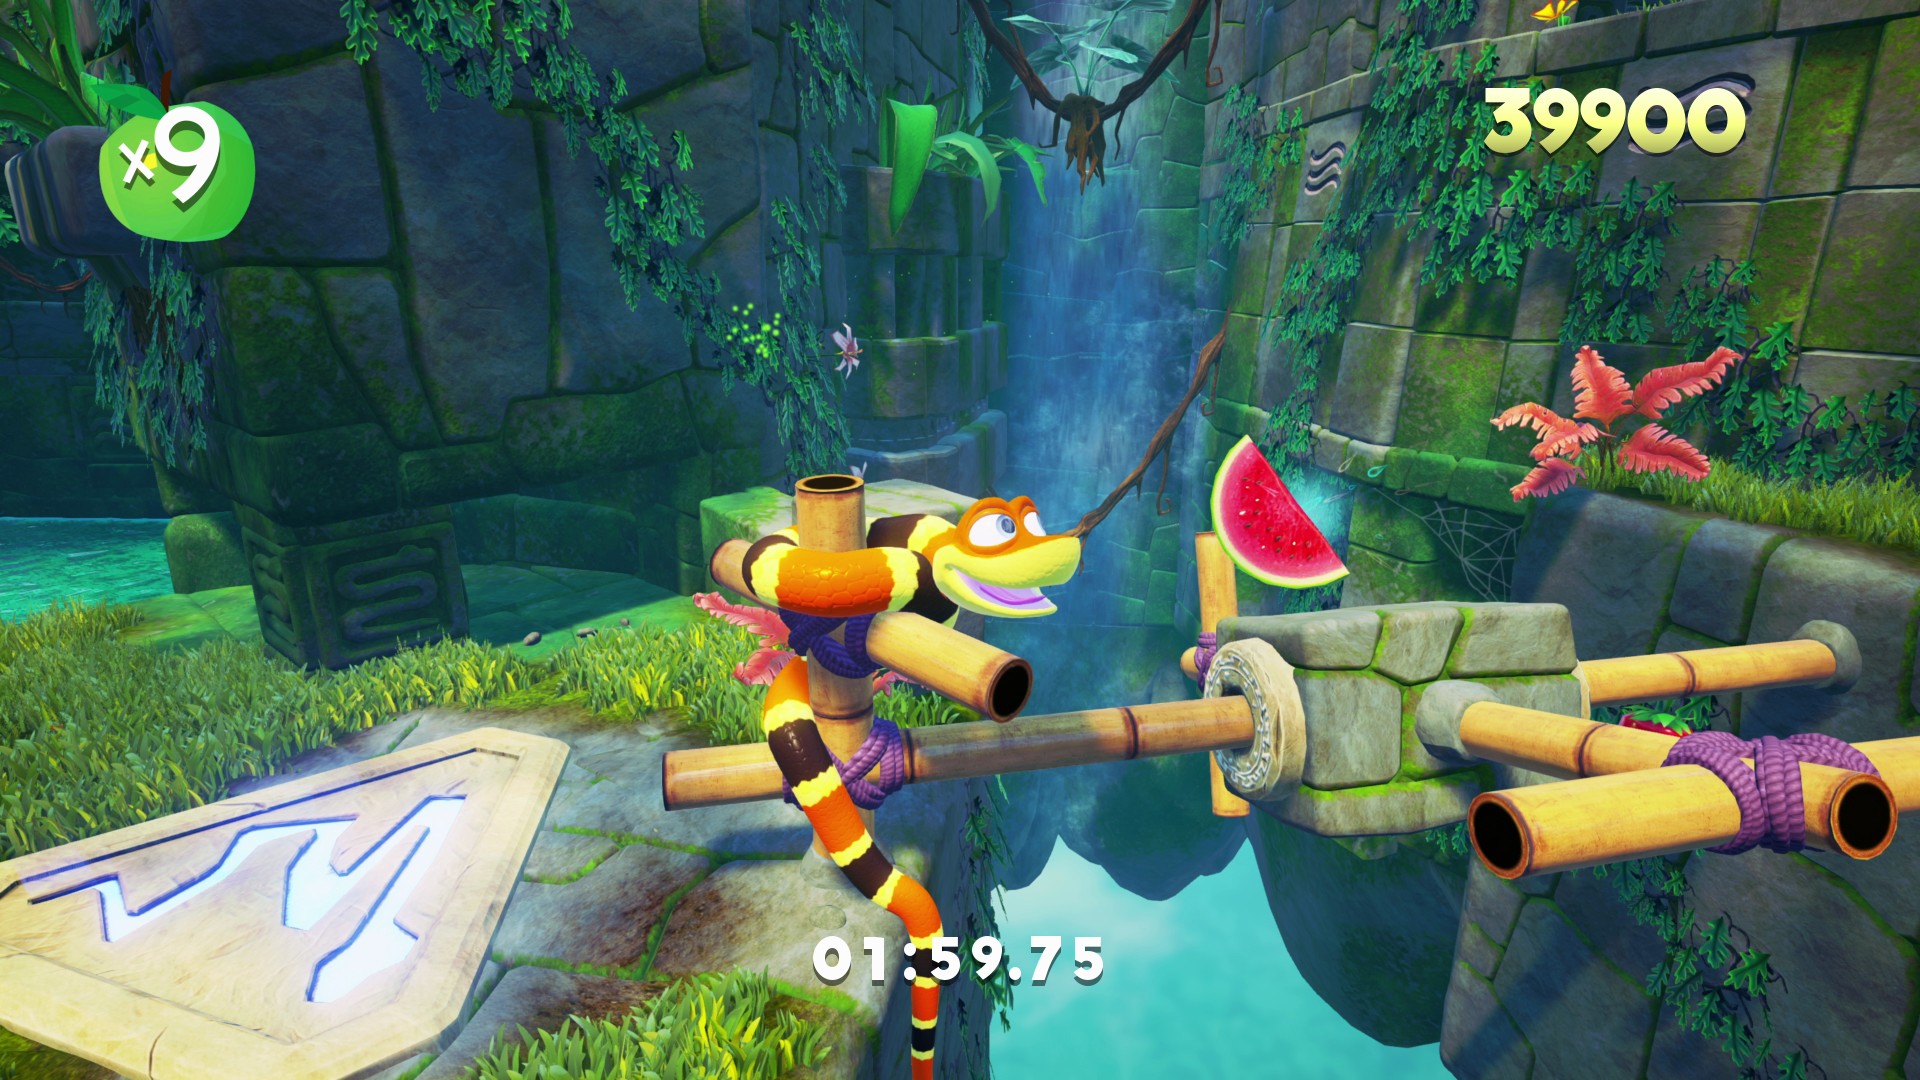 Snake Pass Arcade Mode Update Out Now with Xbox One X Enhancements